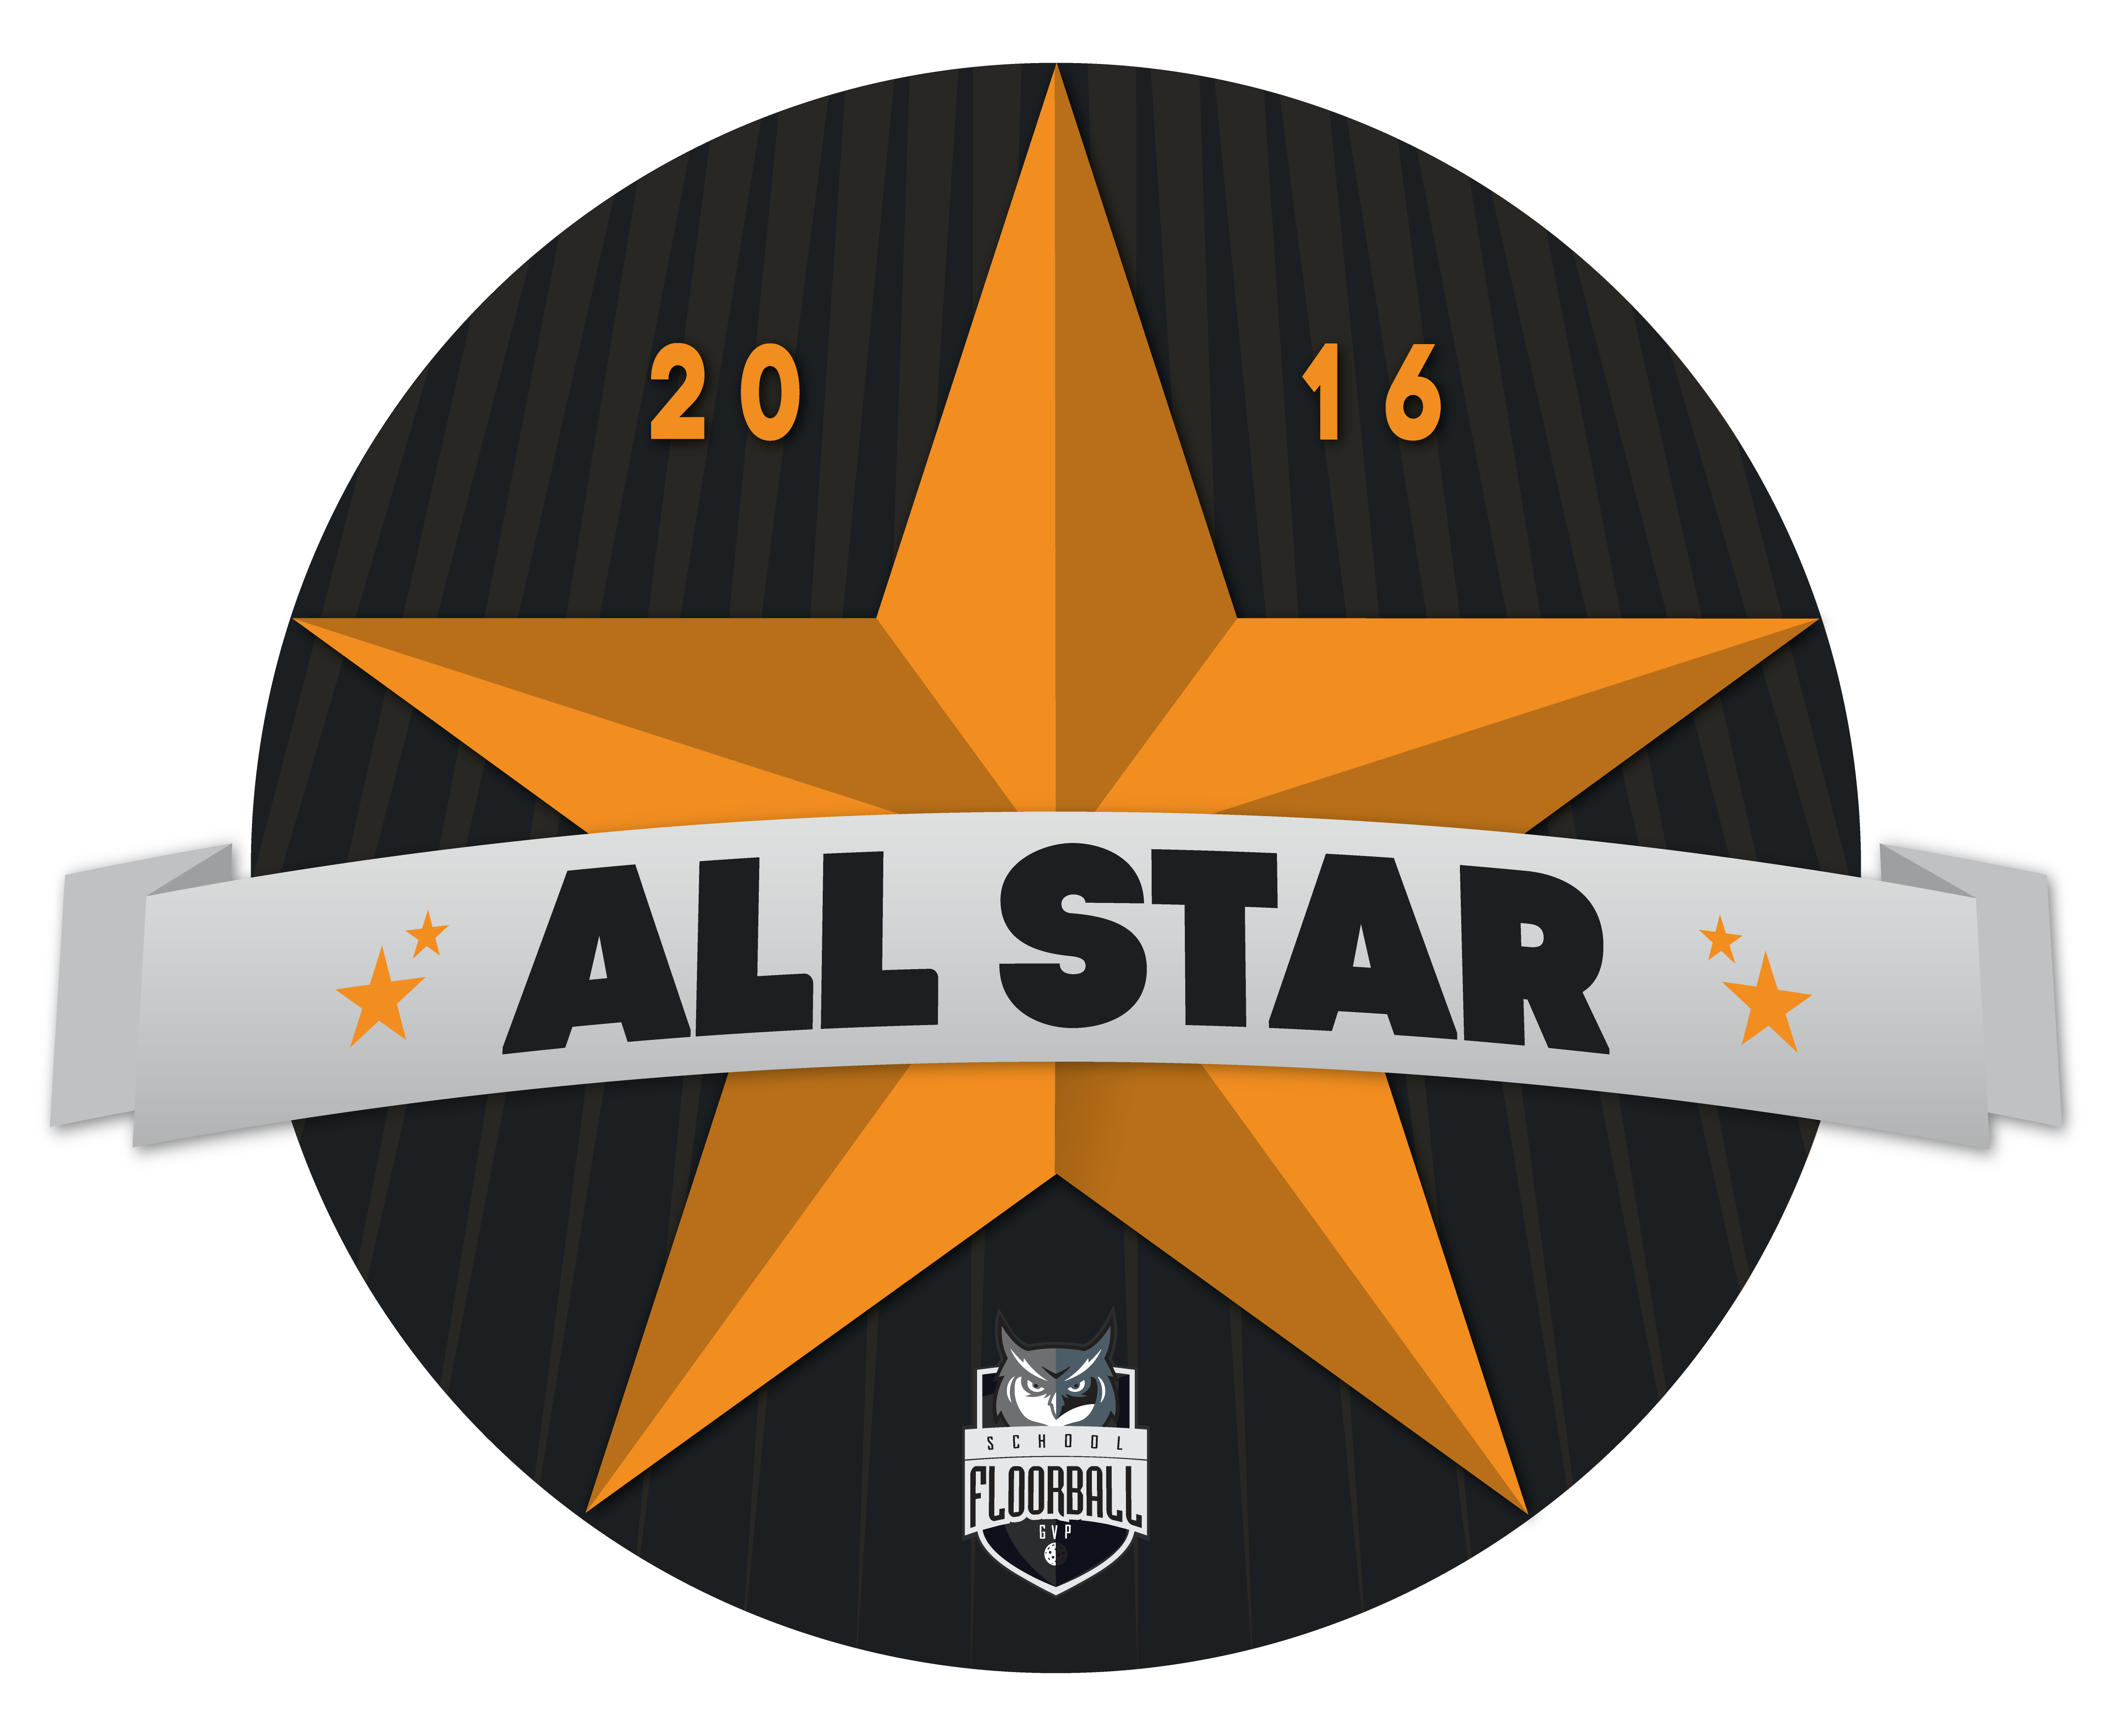 All-star game 2016